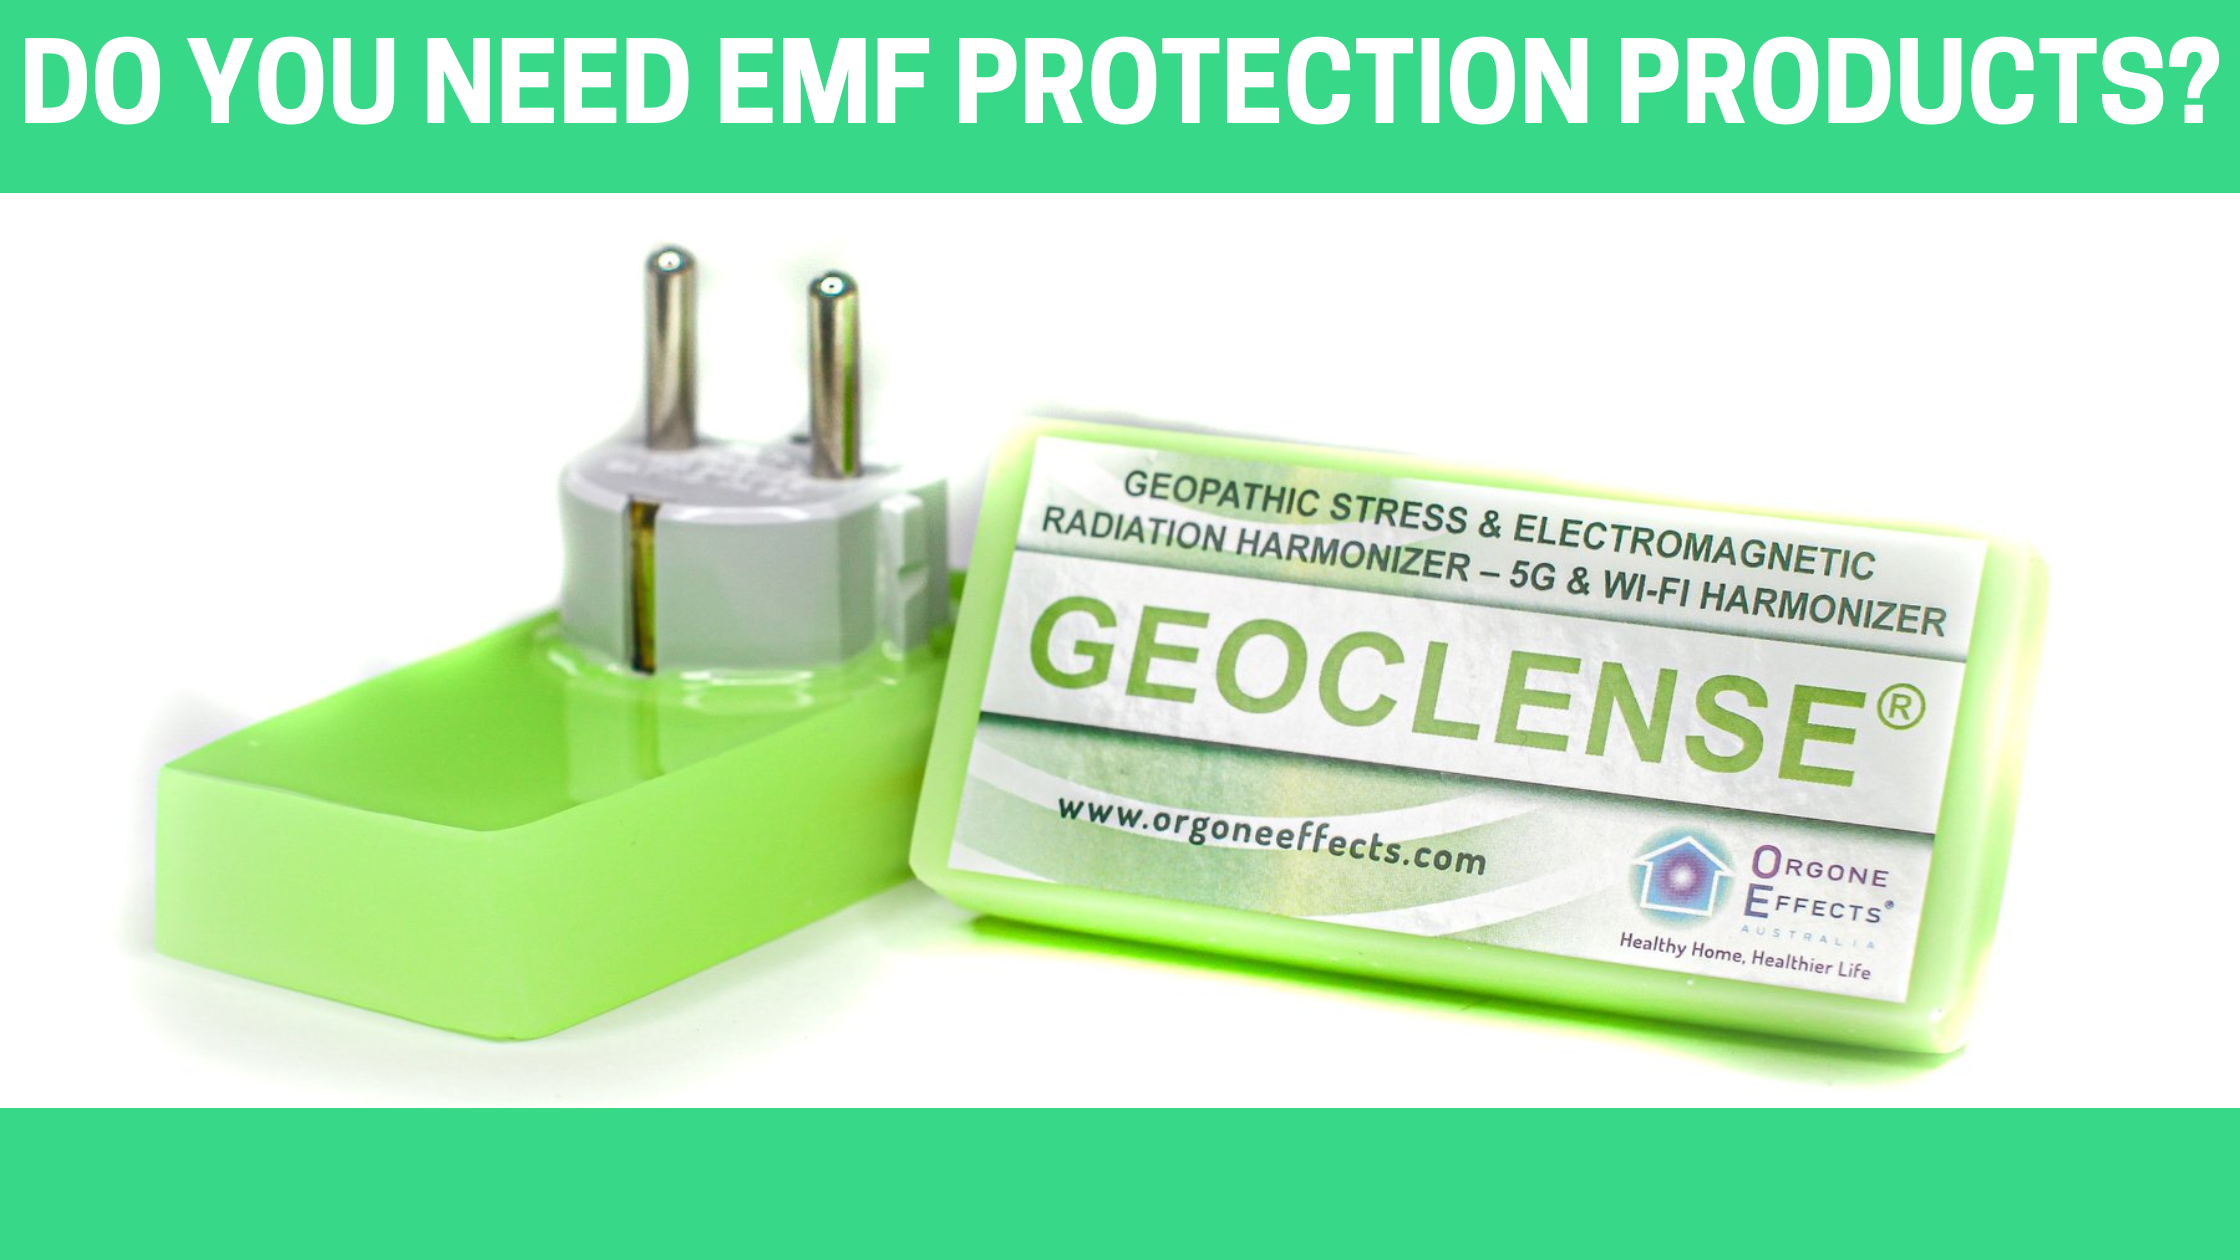 Do You Need EMF Protection Products?